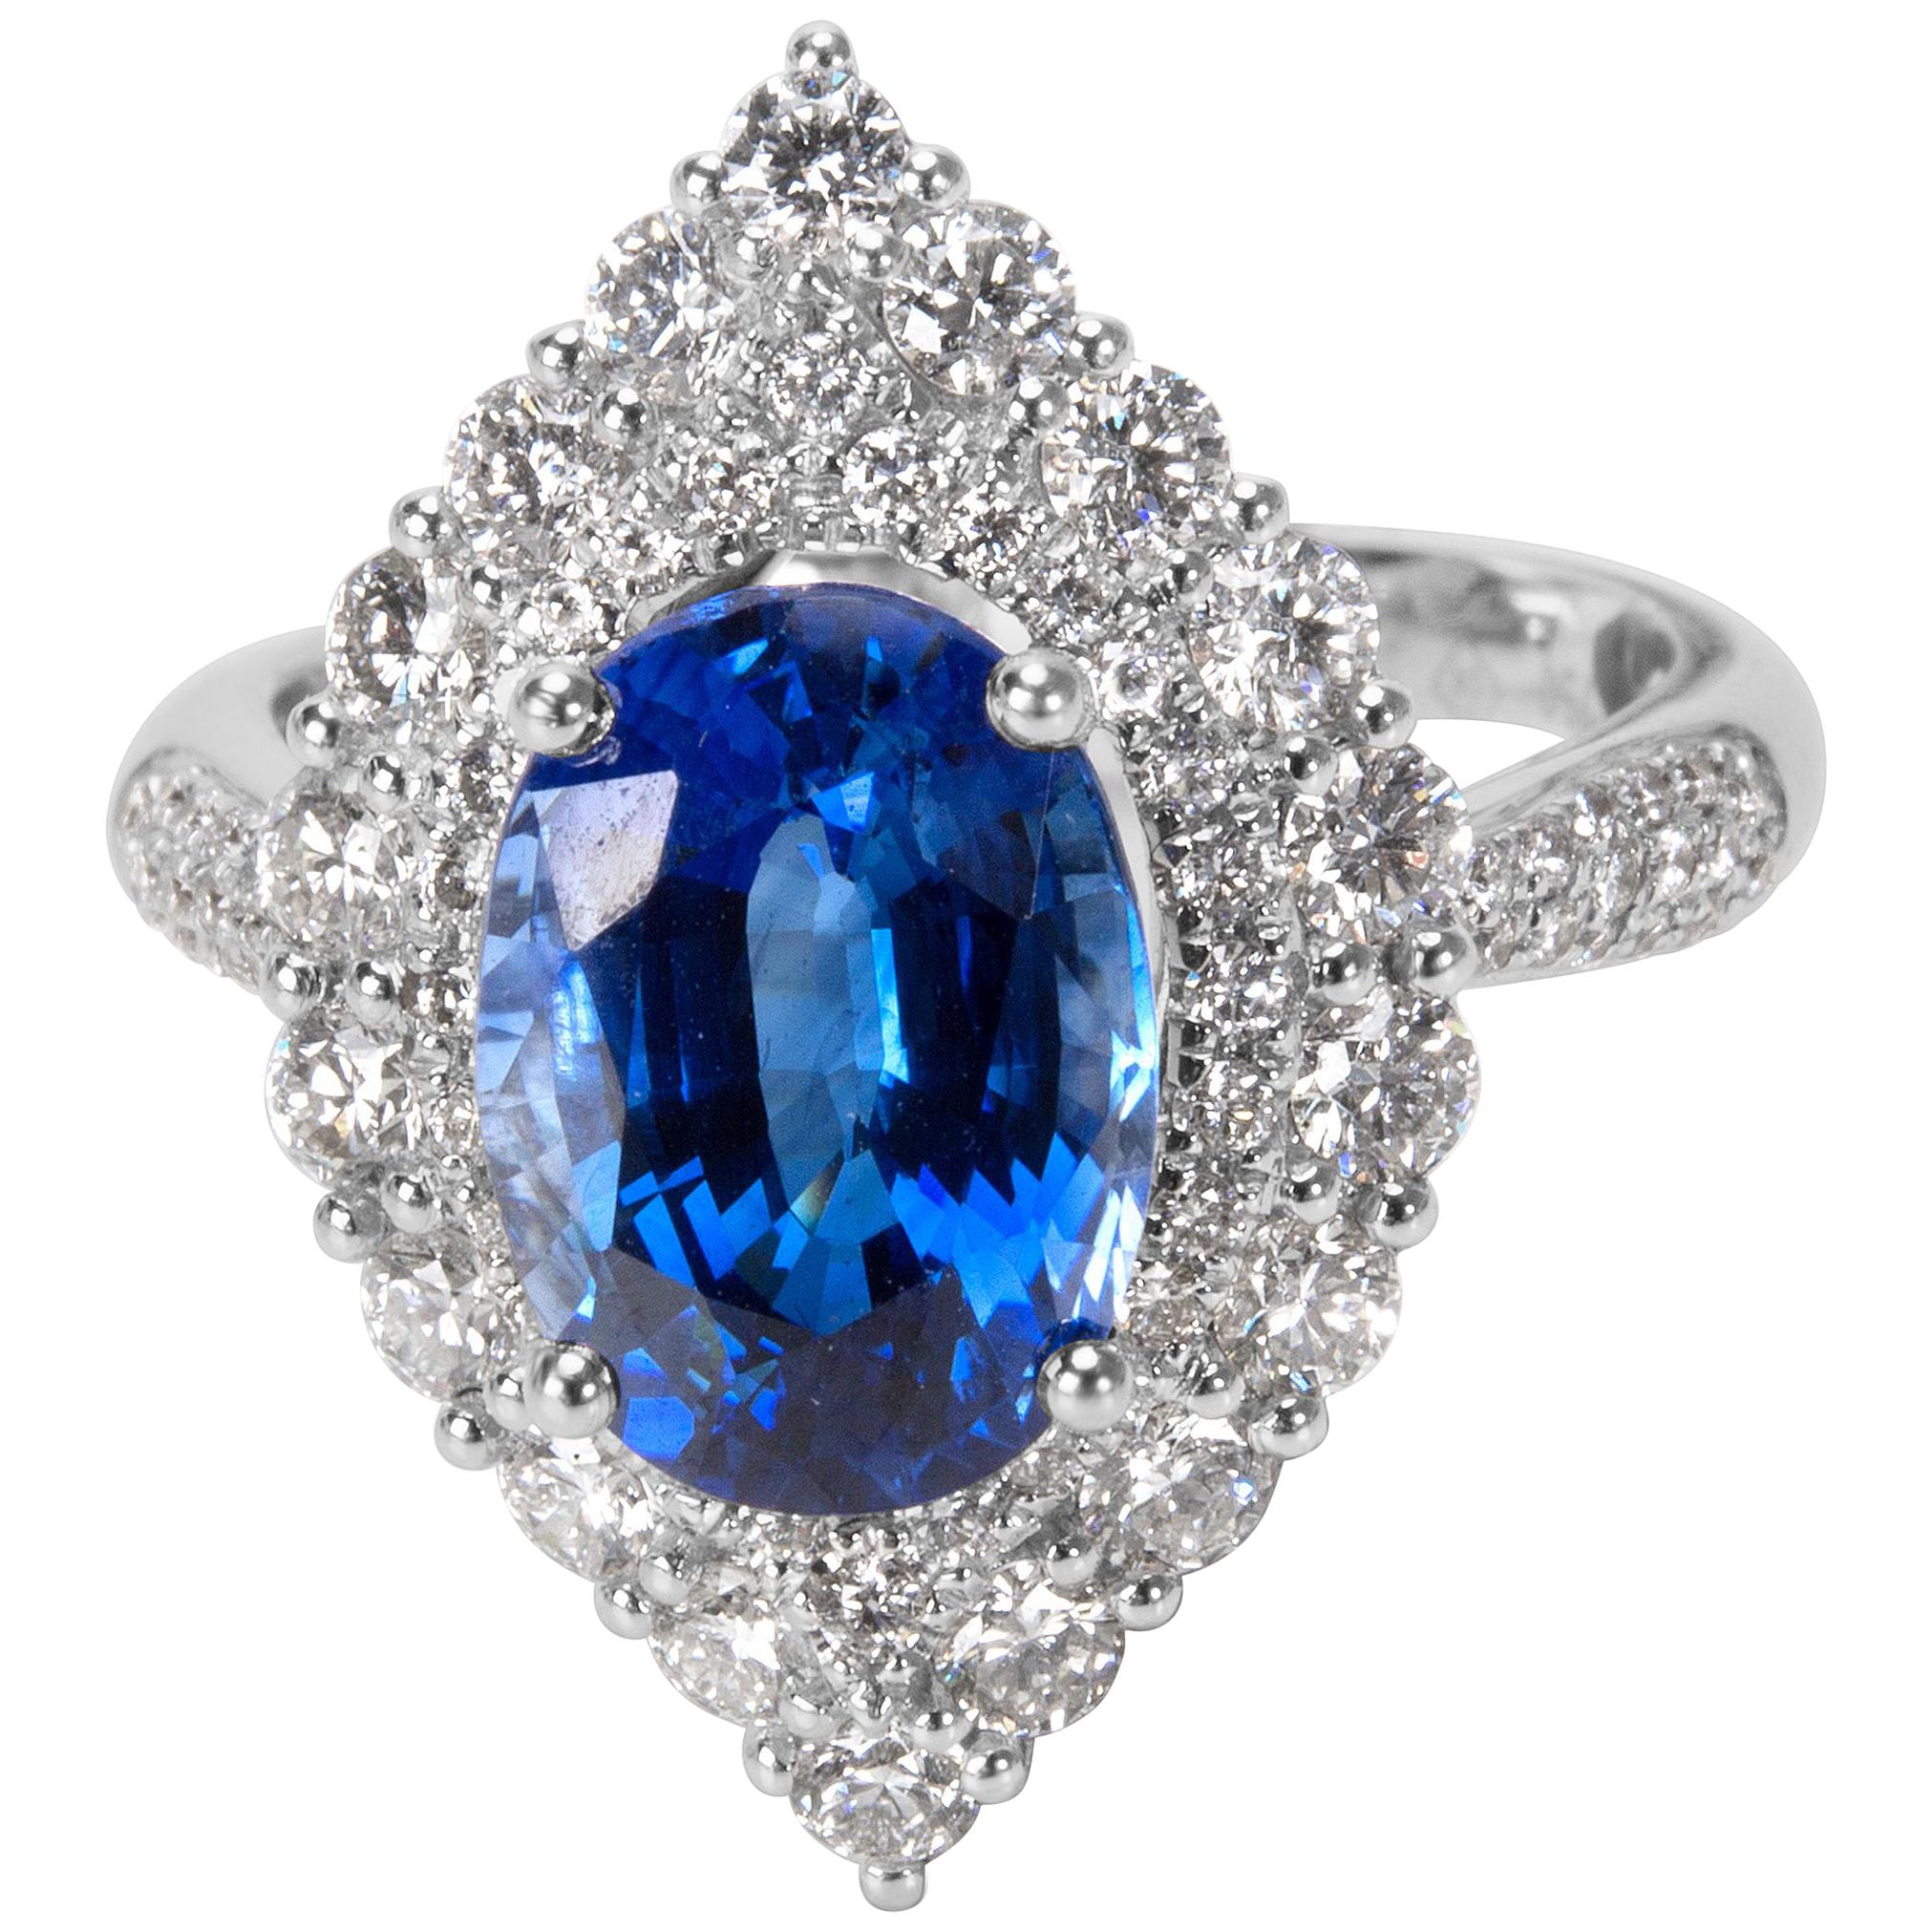 Halo Diamond and Oval Sapphire Ring in 18 Karat White Gold, 5.34 Carat